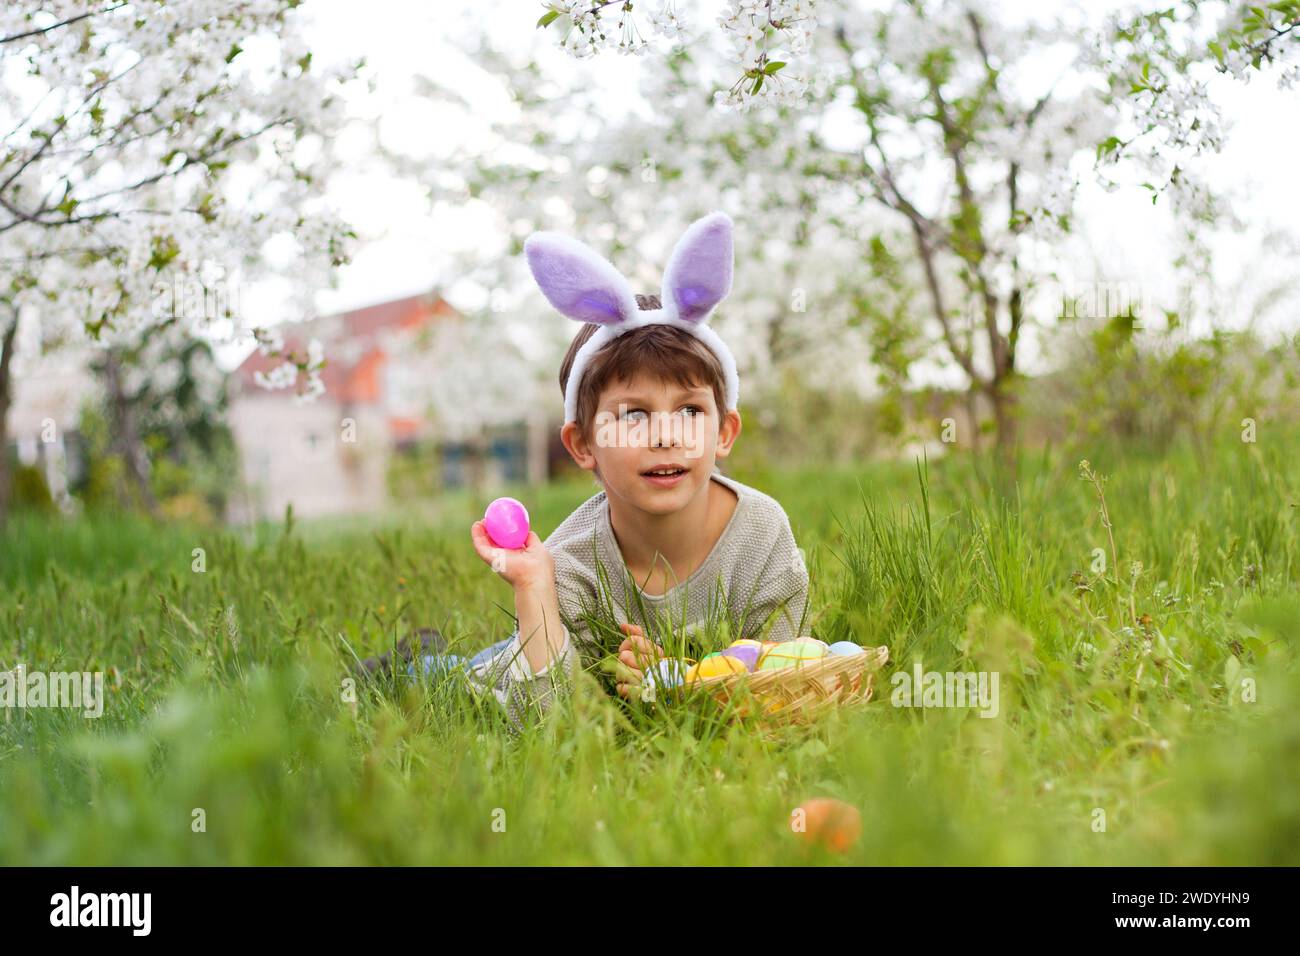 Easter egg hunt. Cute smiling boy in bunny ears lying on green grass with basket of Easter eggs at Easter egg hunt in garden. Portrait against backgro Stock Photo